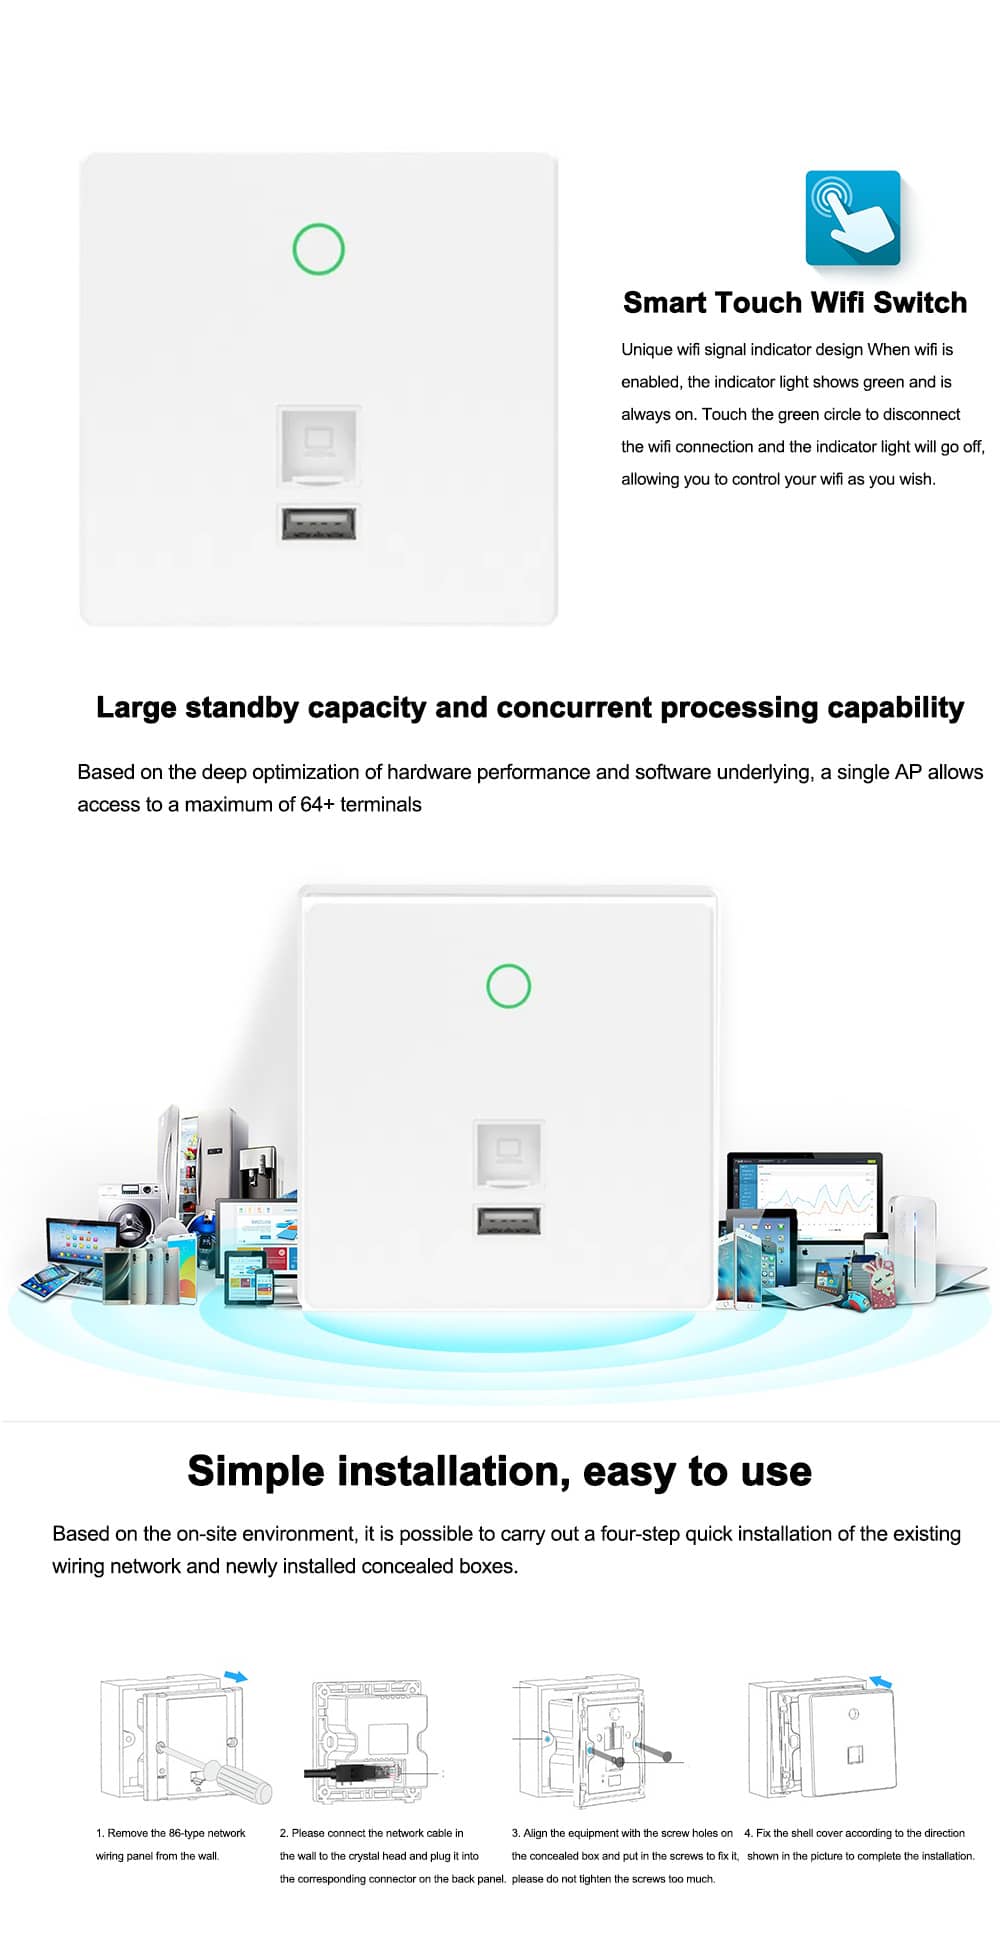 300Mbps 2.4G Wall Mount Panel Wireless Access Point